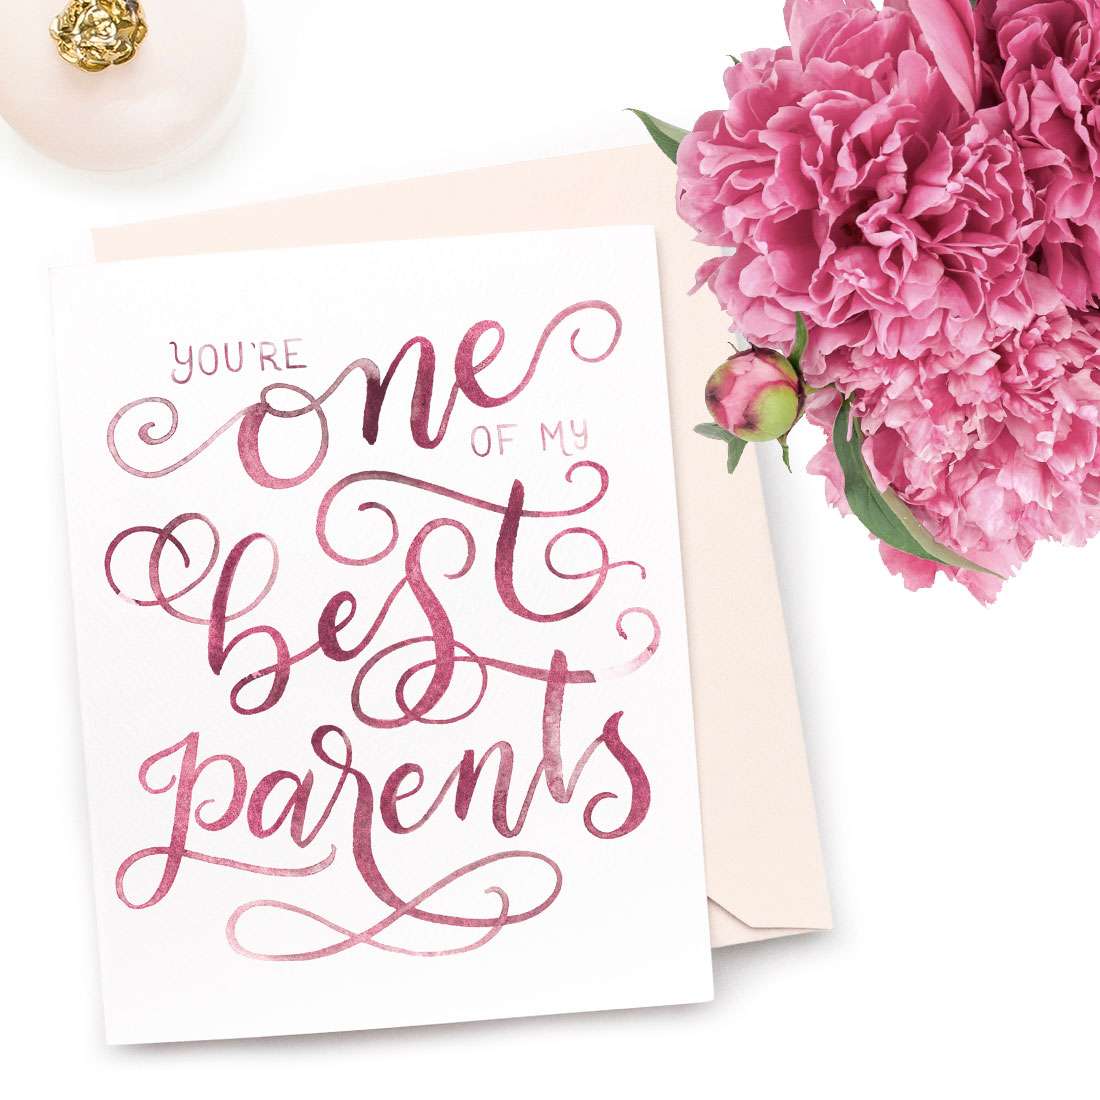 Image of a hand-lettered watercolor card saying "You're one of my best parents" by CharmCat | charmcat.net